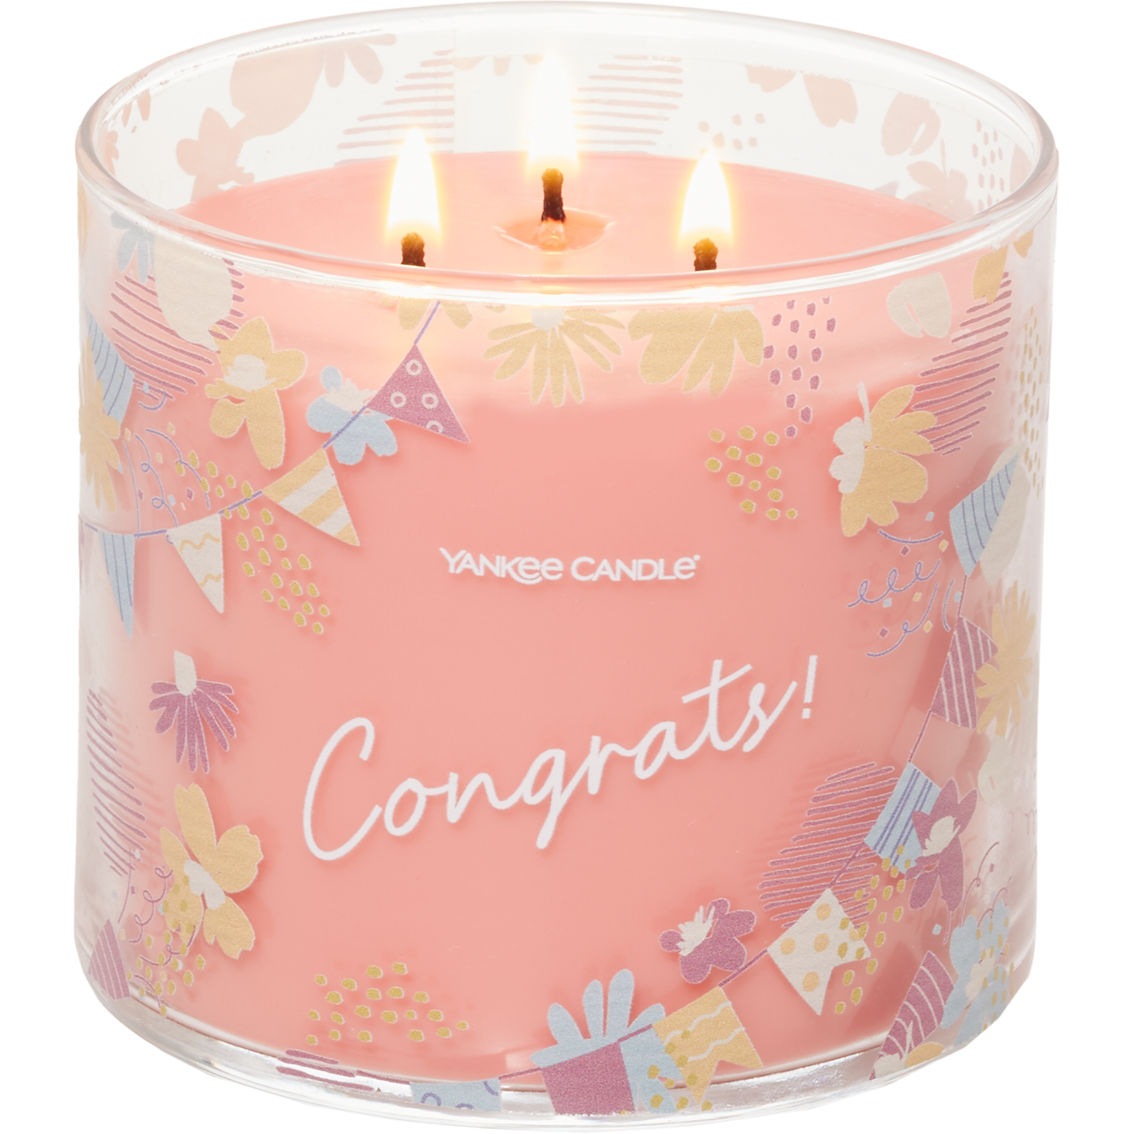 Yankee Candle White Strawberry Bellini Congrats 3-Wick Candle - Image 2 of 2